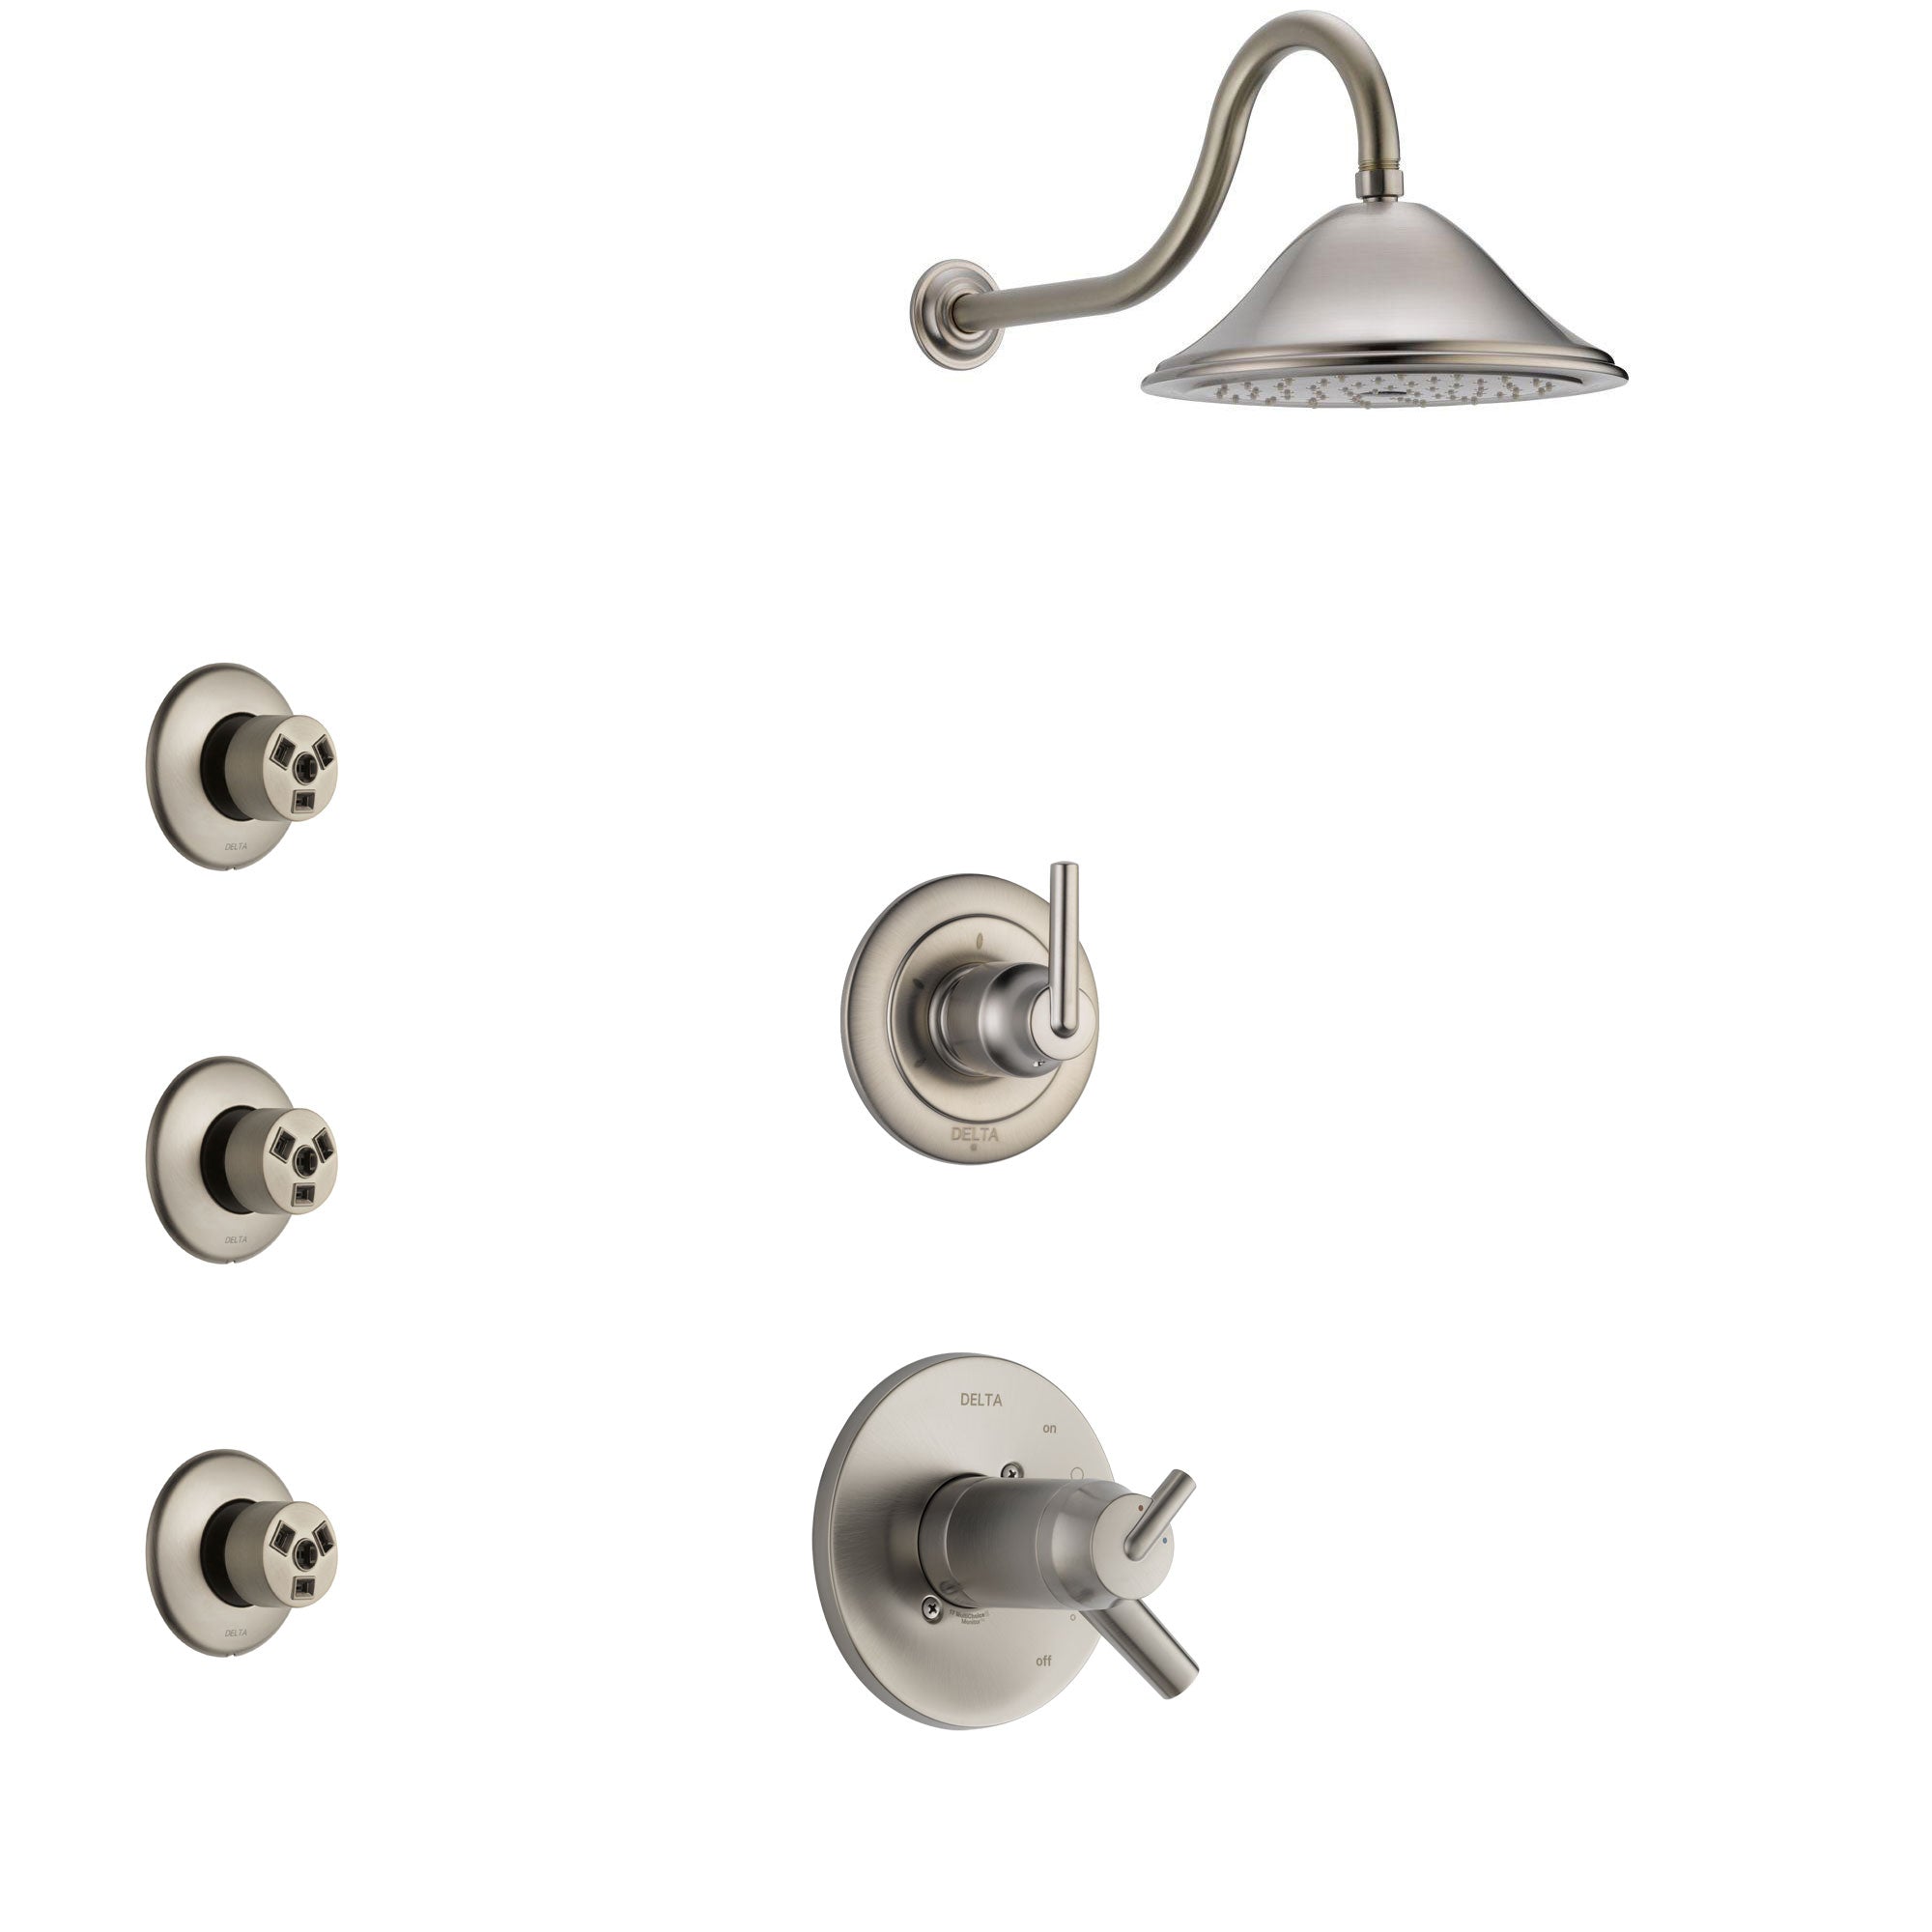 Delta Trinsic Dual Thermostatic Control Handle Stainless Steel Finish Shower System, 3-Setting Diverter, Showerhead, and 3 Body Sprays SS17T592SS4